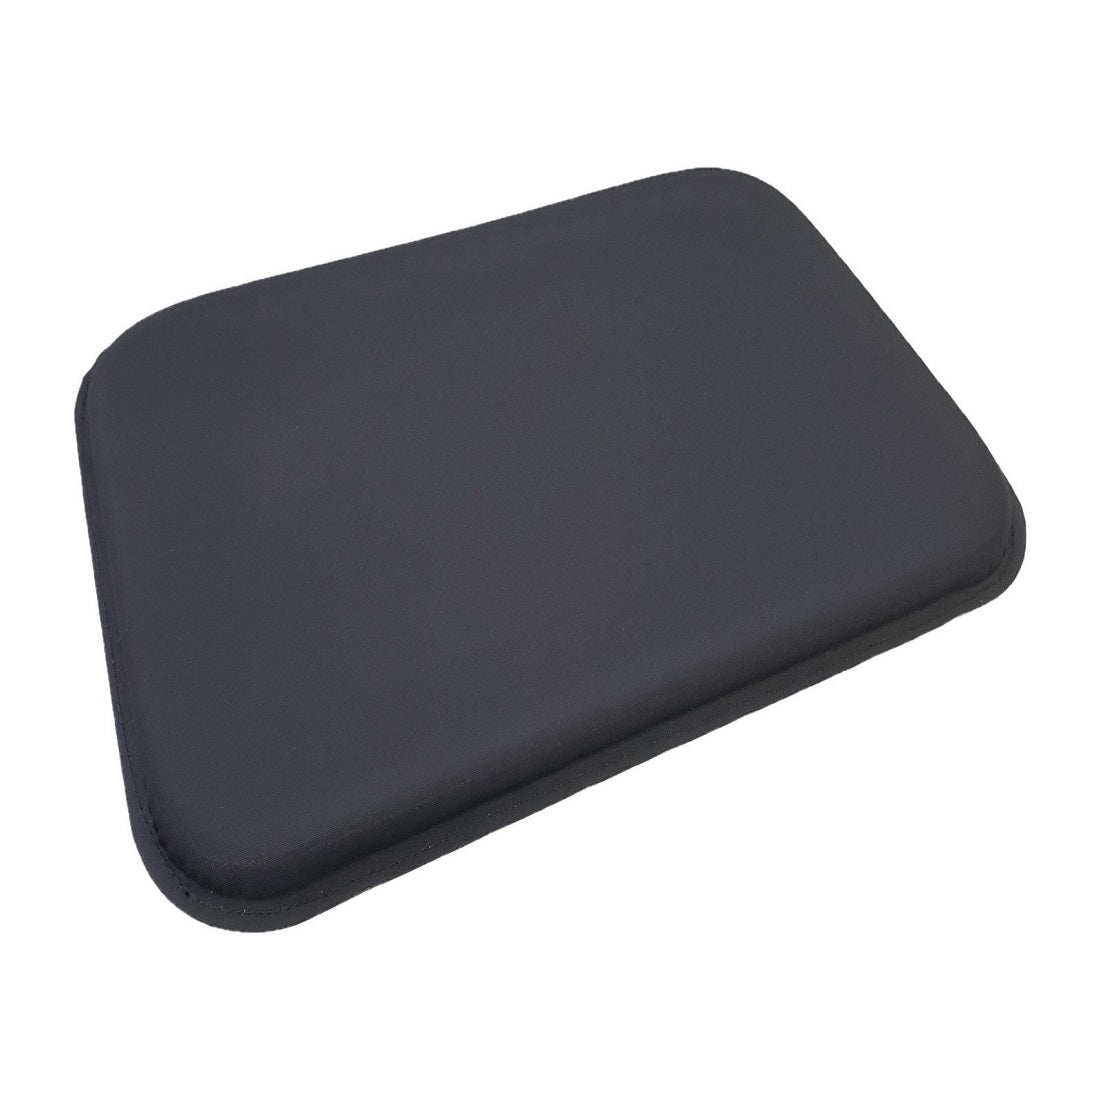 ULTRAGEL Relieve Universal pad All in One Mouse, Hand, Wrist, Arm Rest and Computer Gel Pad